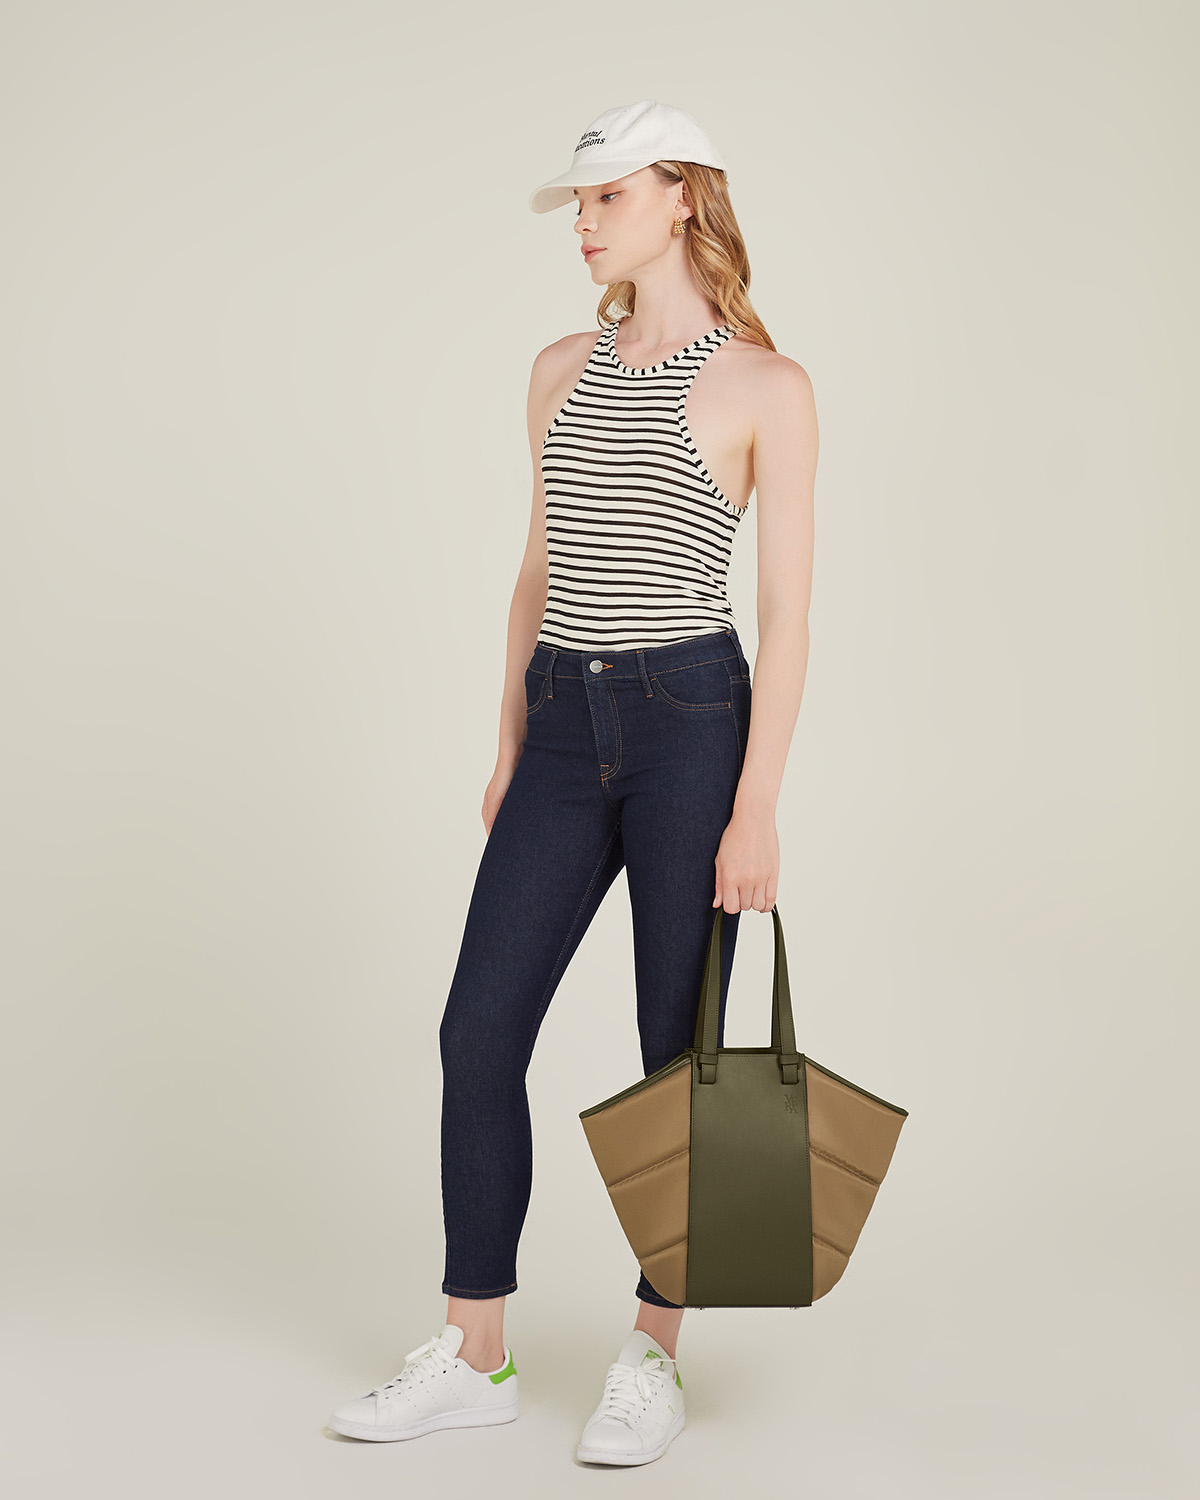 VERA Cabas Tote Puffy, Sporty Look